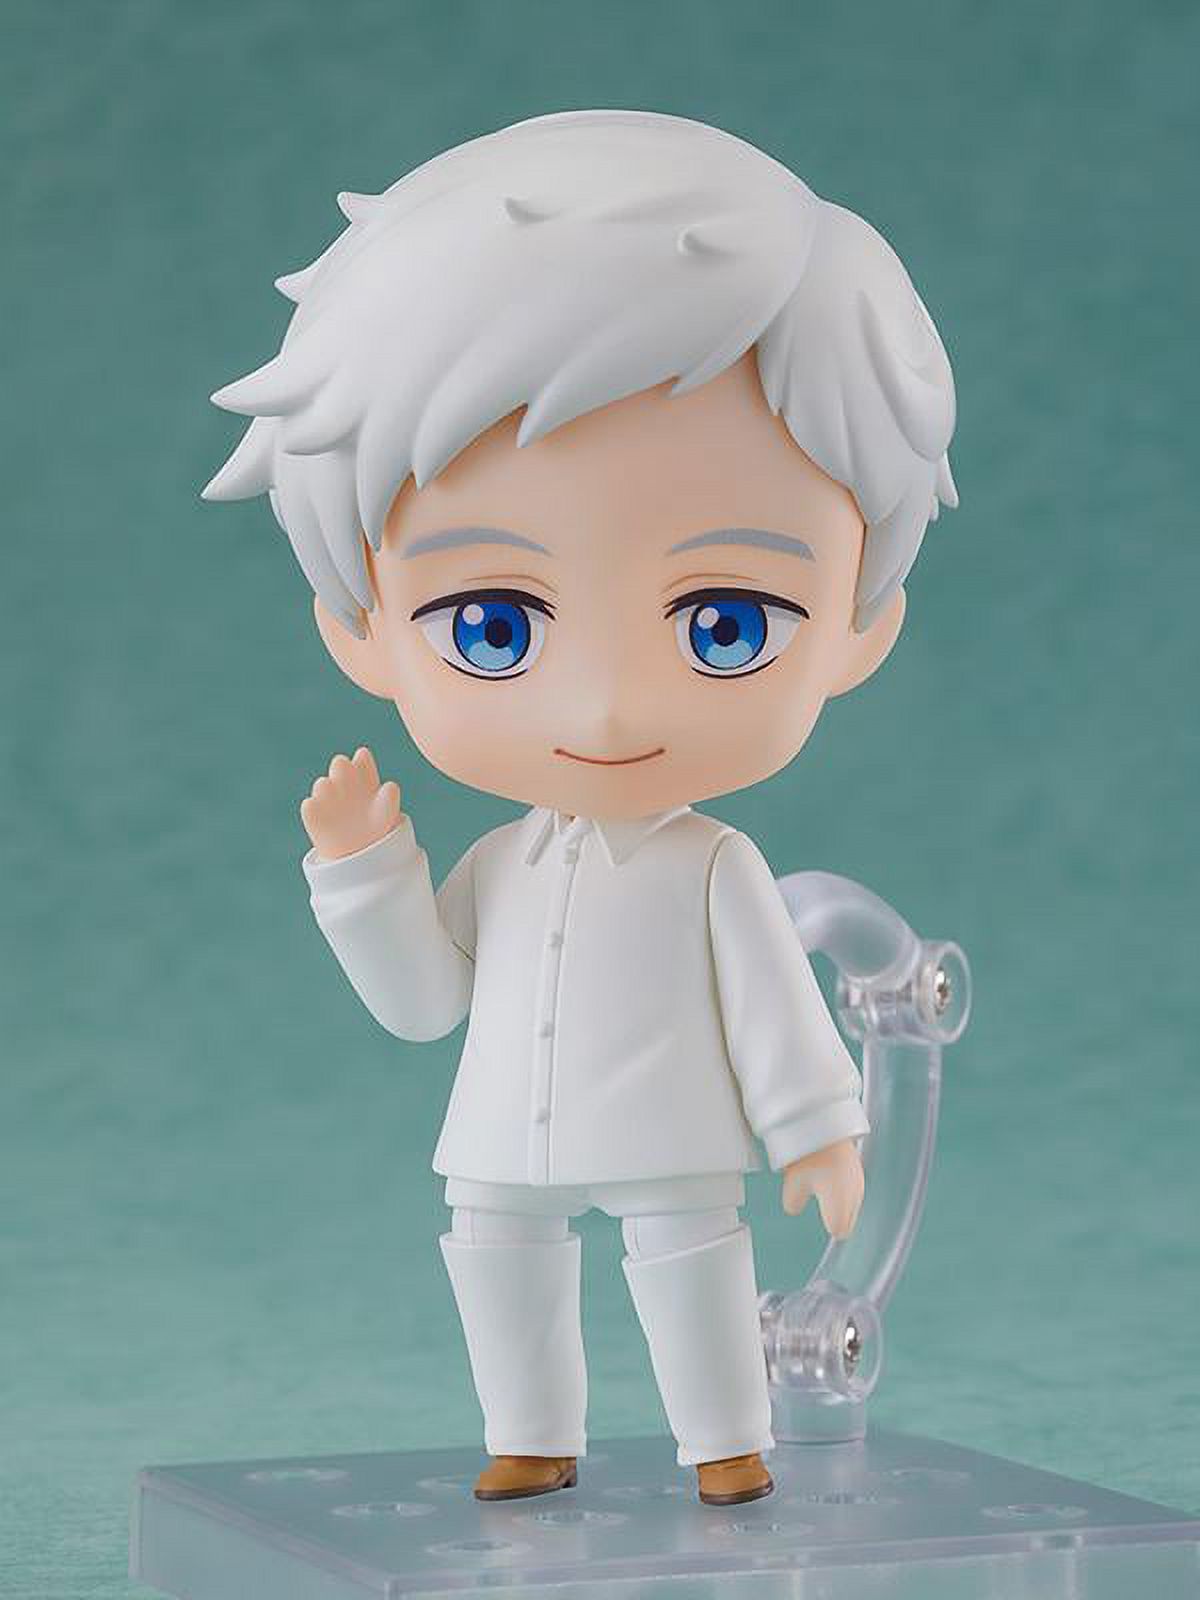 Good Smile The Promised Neverland Norman Nendoroid Action Figure 